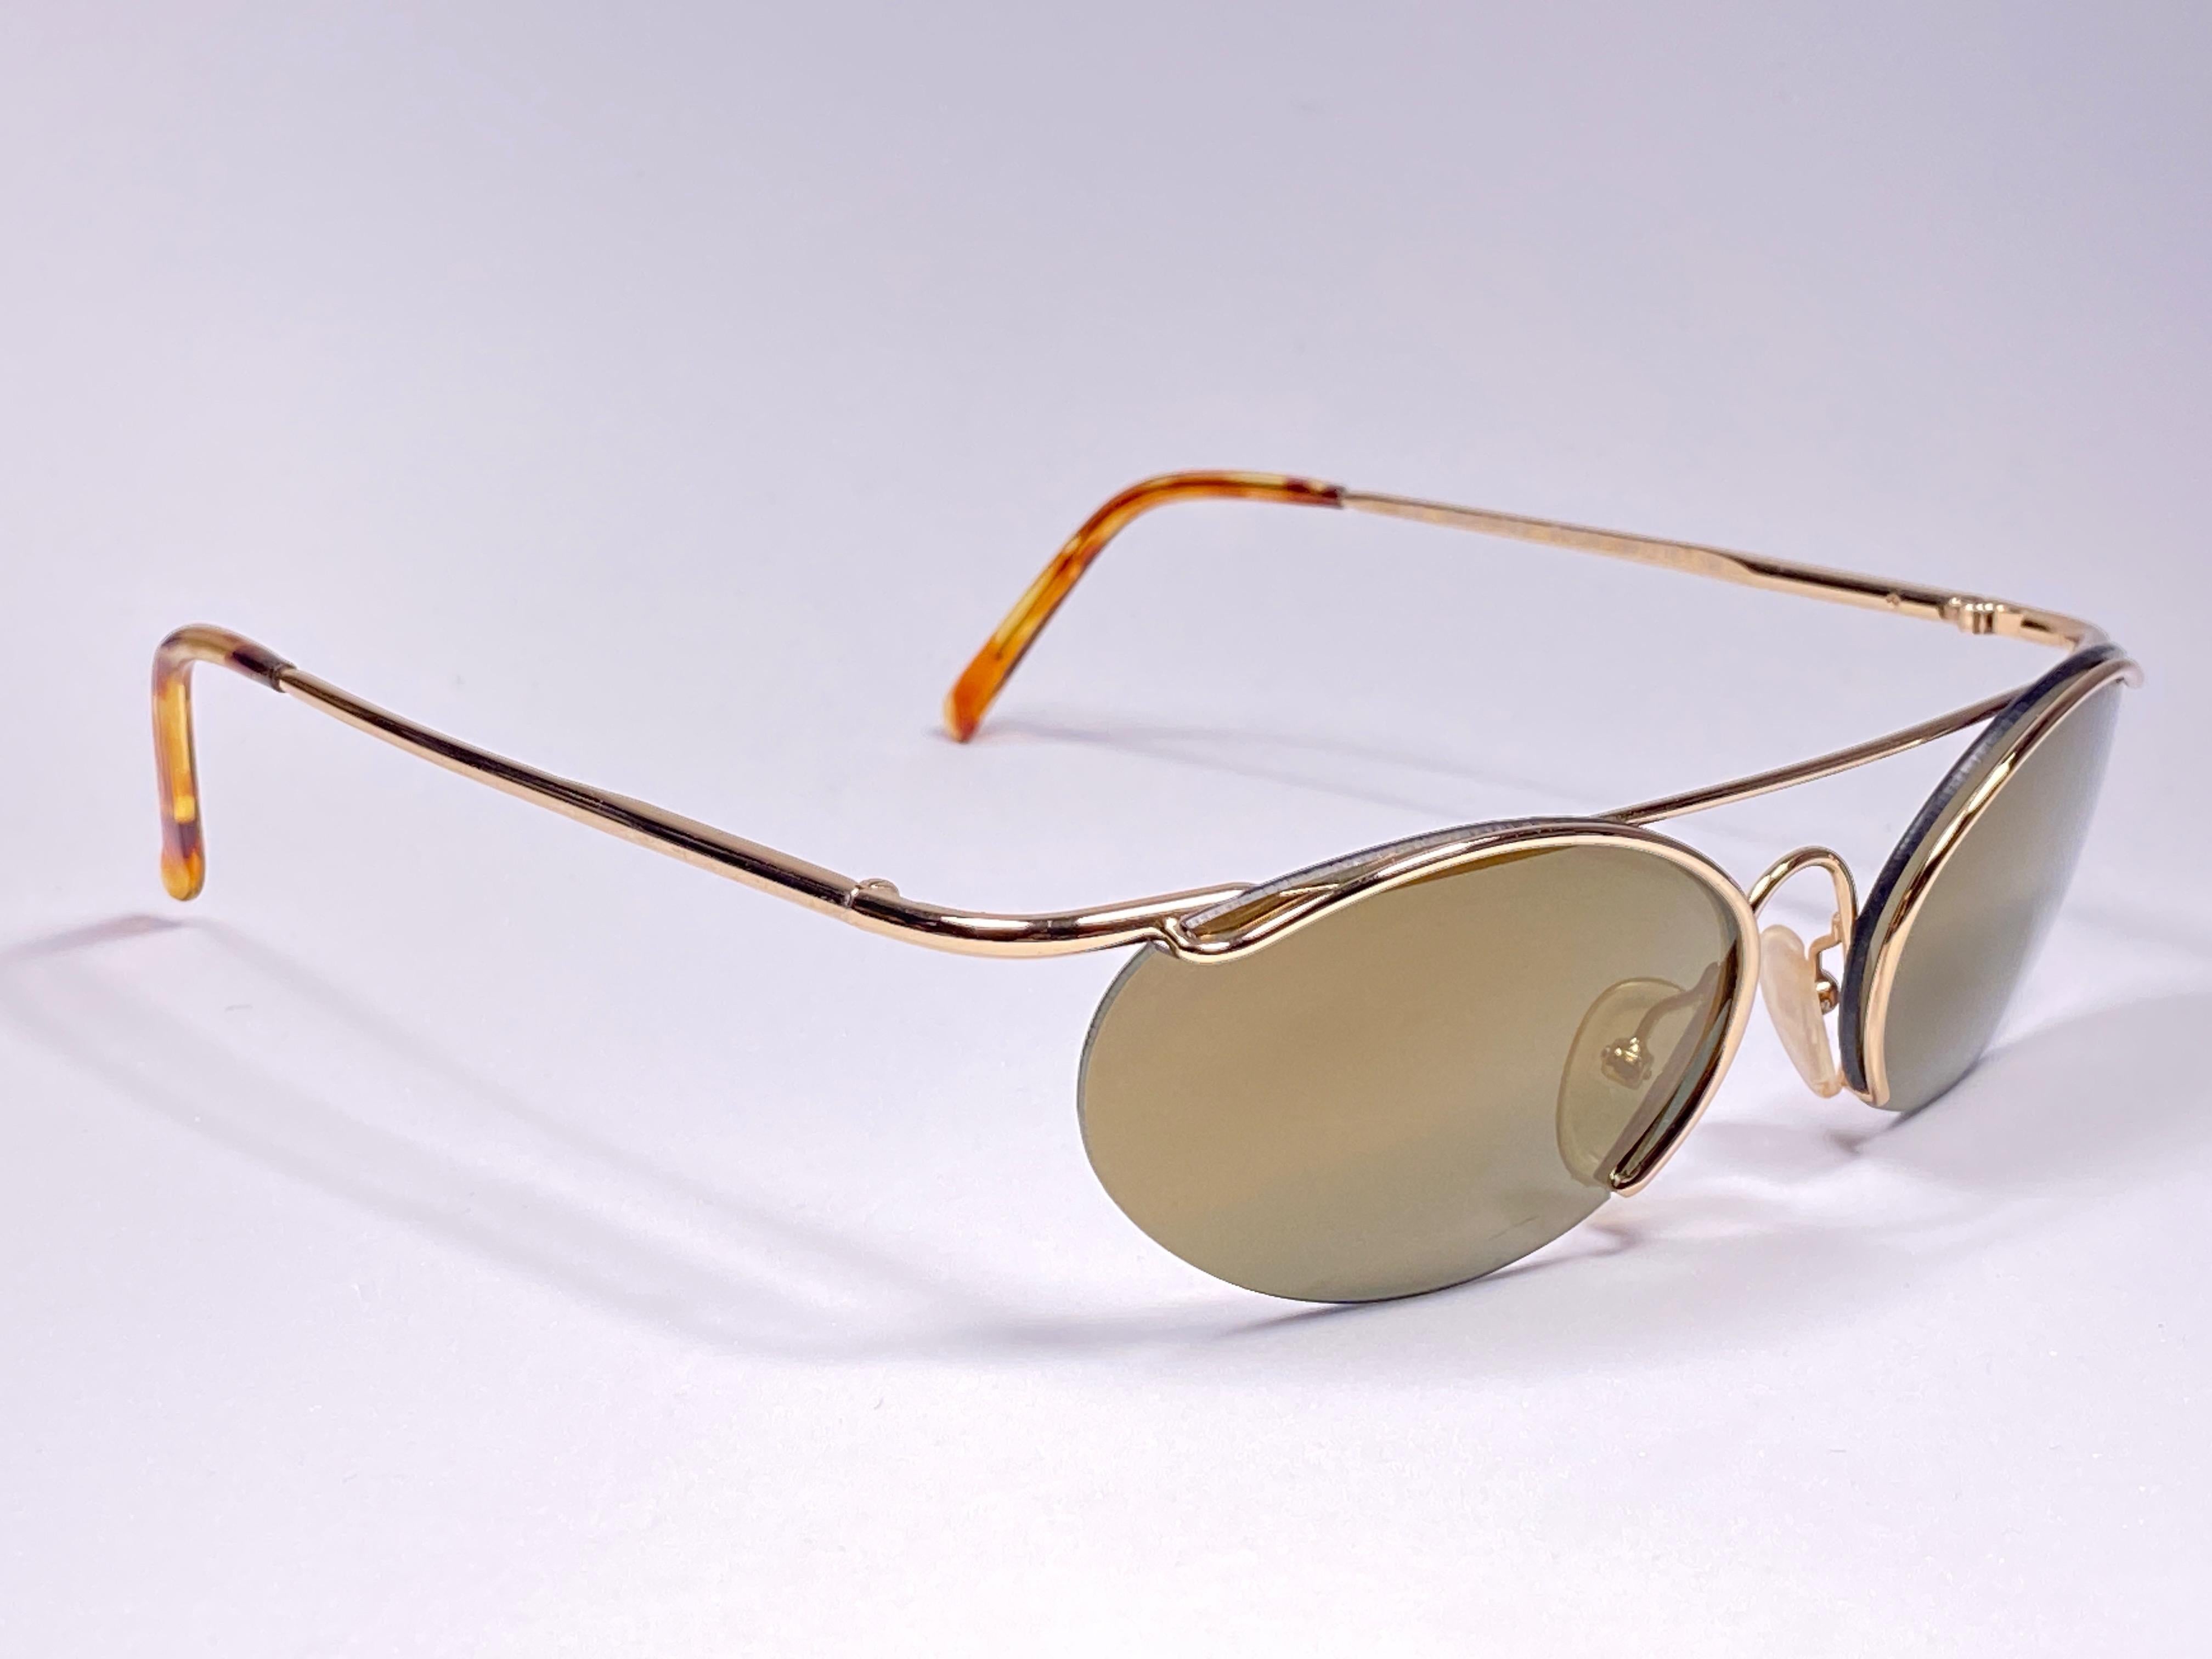 Collectors item from the 1990's, 20 years old. 

Porsche Design small oval frame with gold mirrored lenses.  
Amazing craftsmanship and quality. This pair has light of wear due to storage.

Made in Austria.

MEASUREMENTS 

FRONT : 12.5

LENS HEIGHT